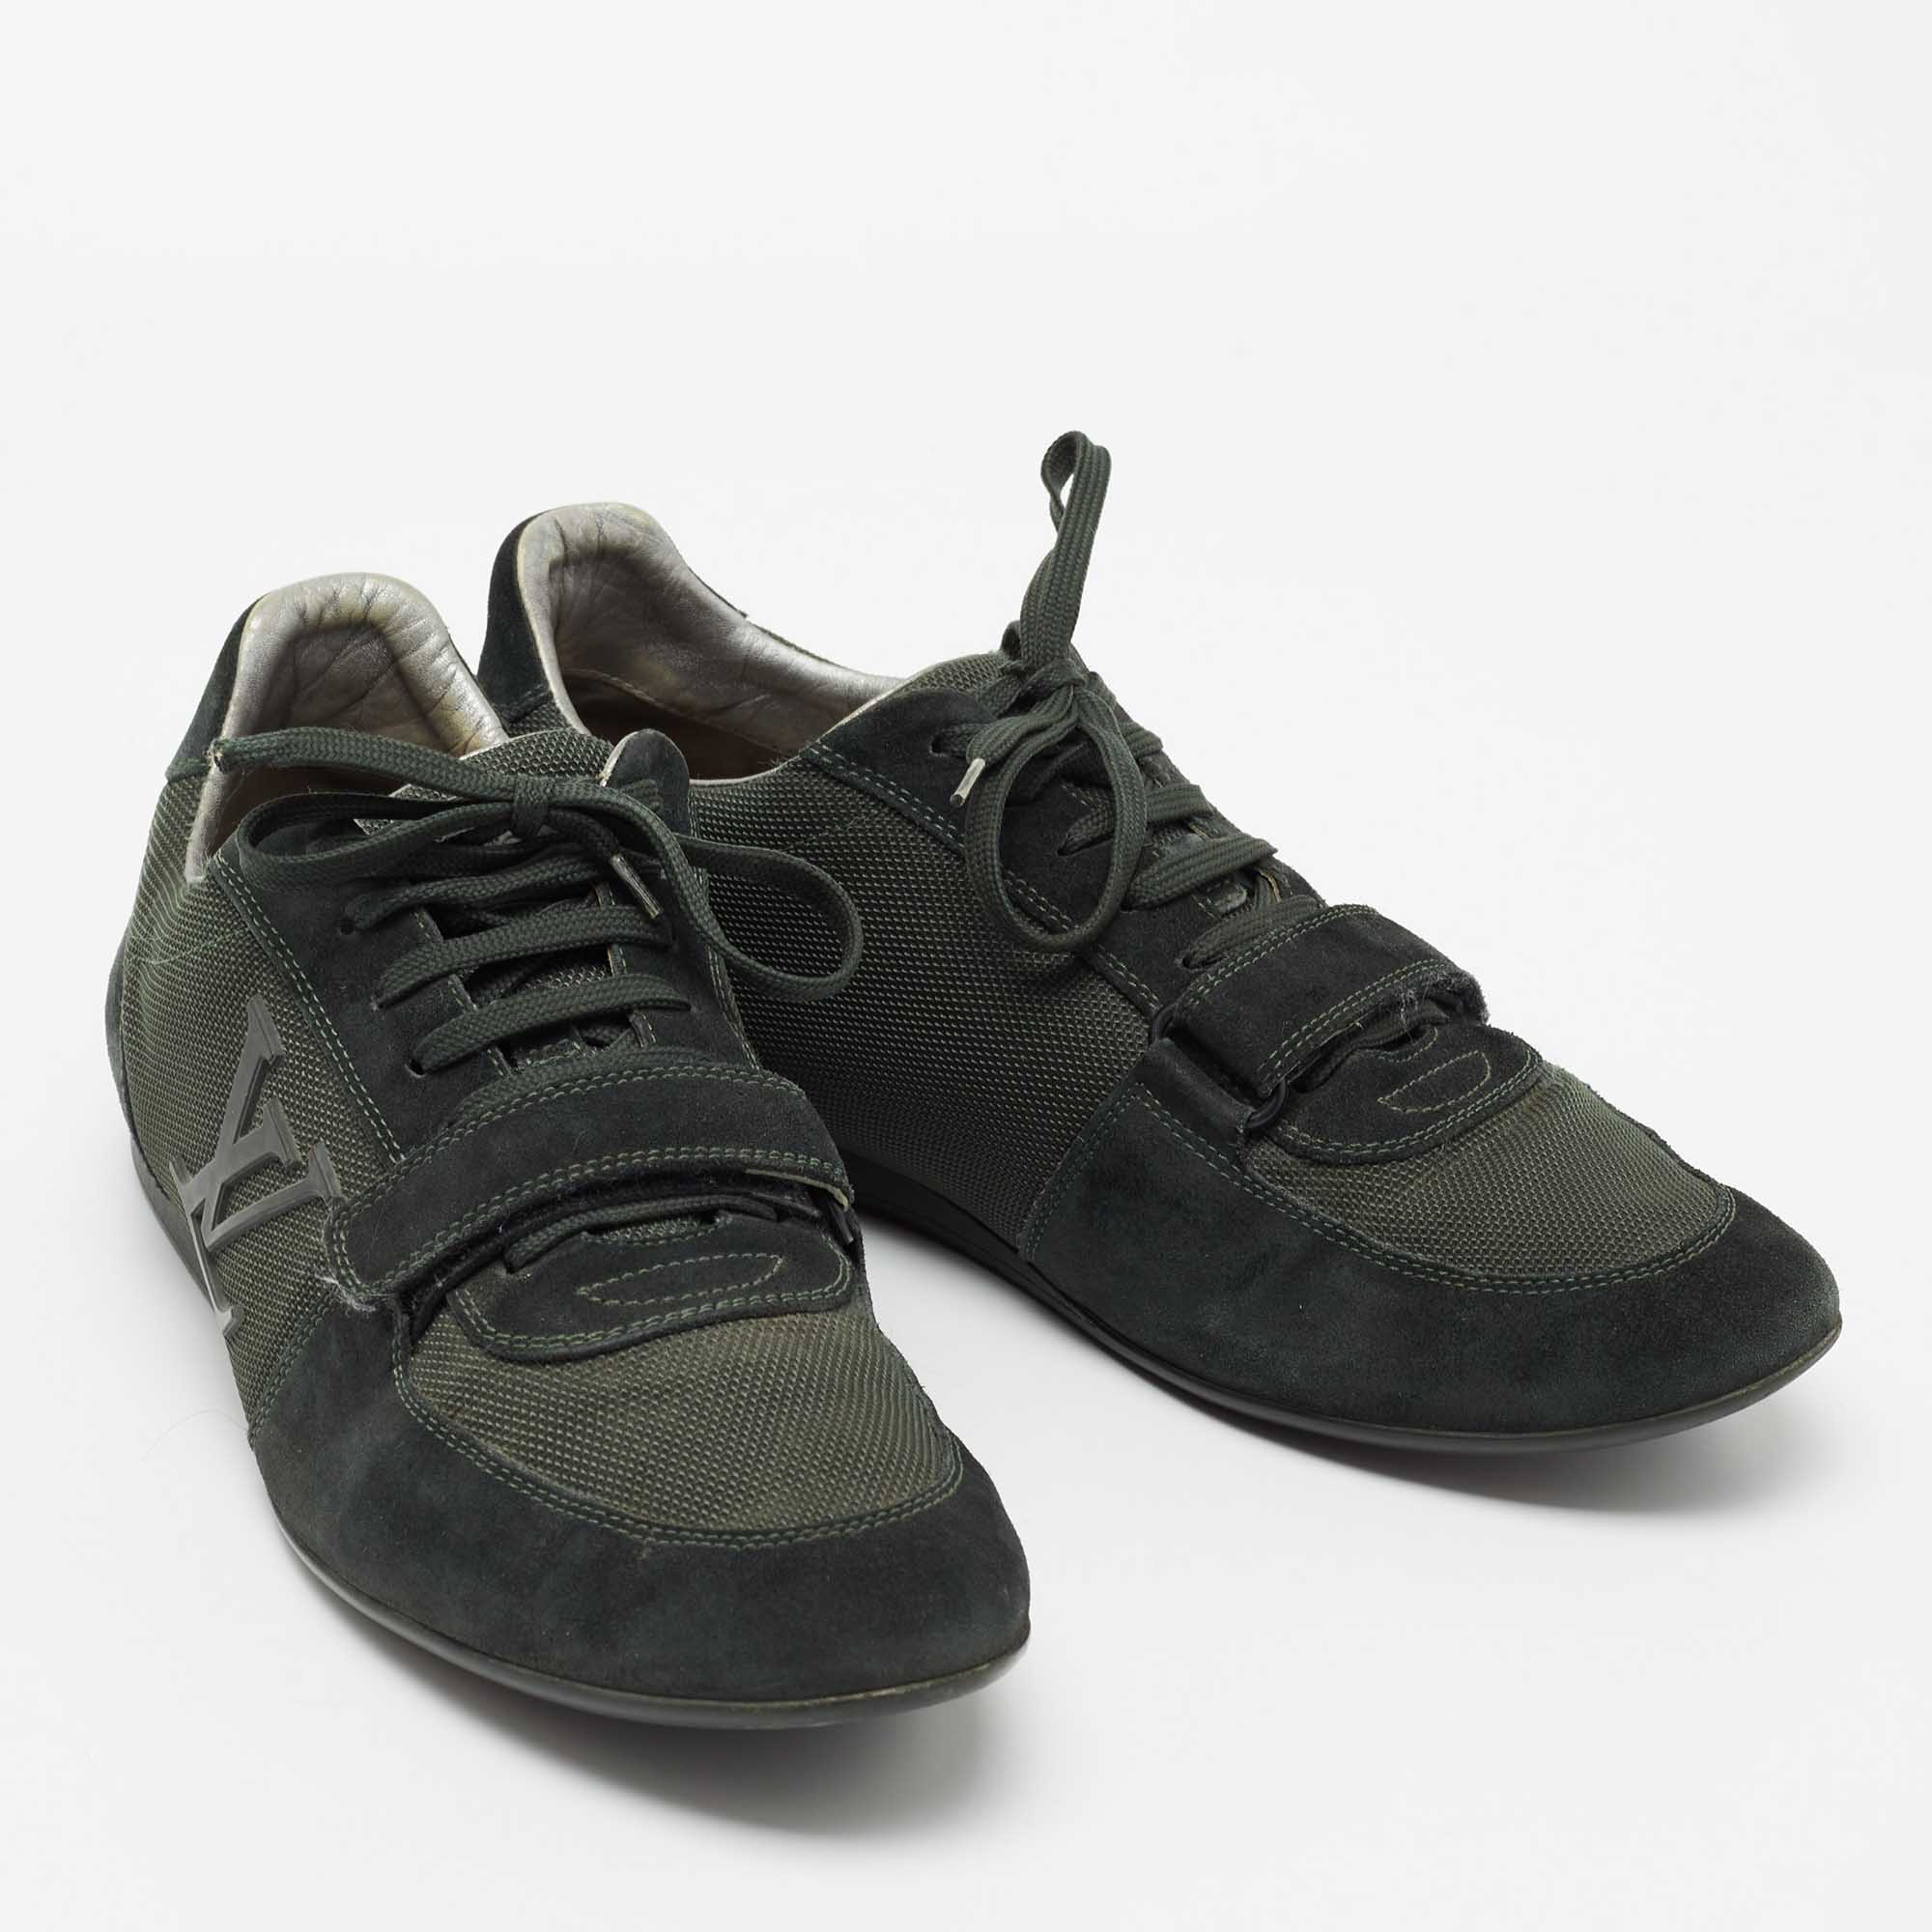 Louis Vuitton Black/Grey Patent Leather And Suede Runner Sneakers Size 42.5 Louis  Vuitton